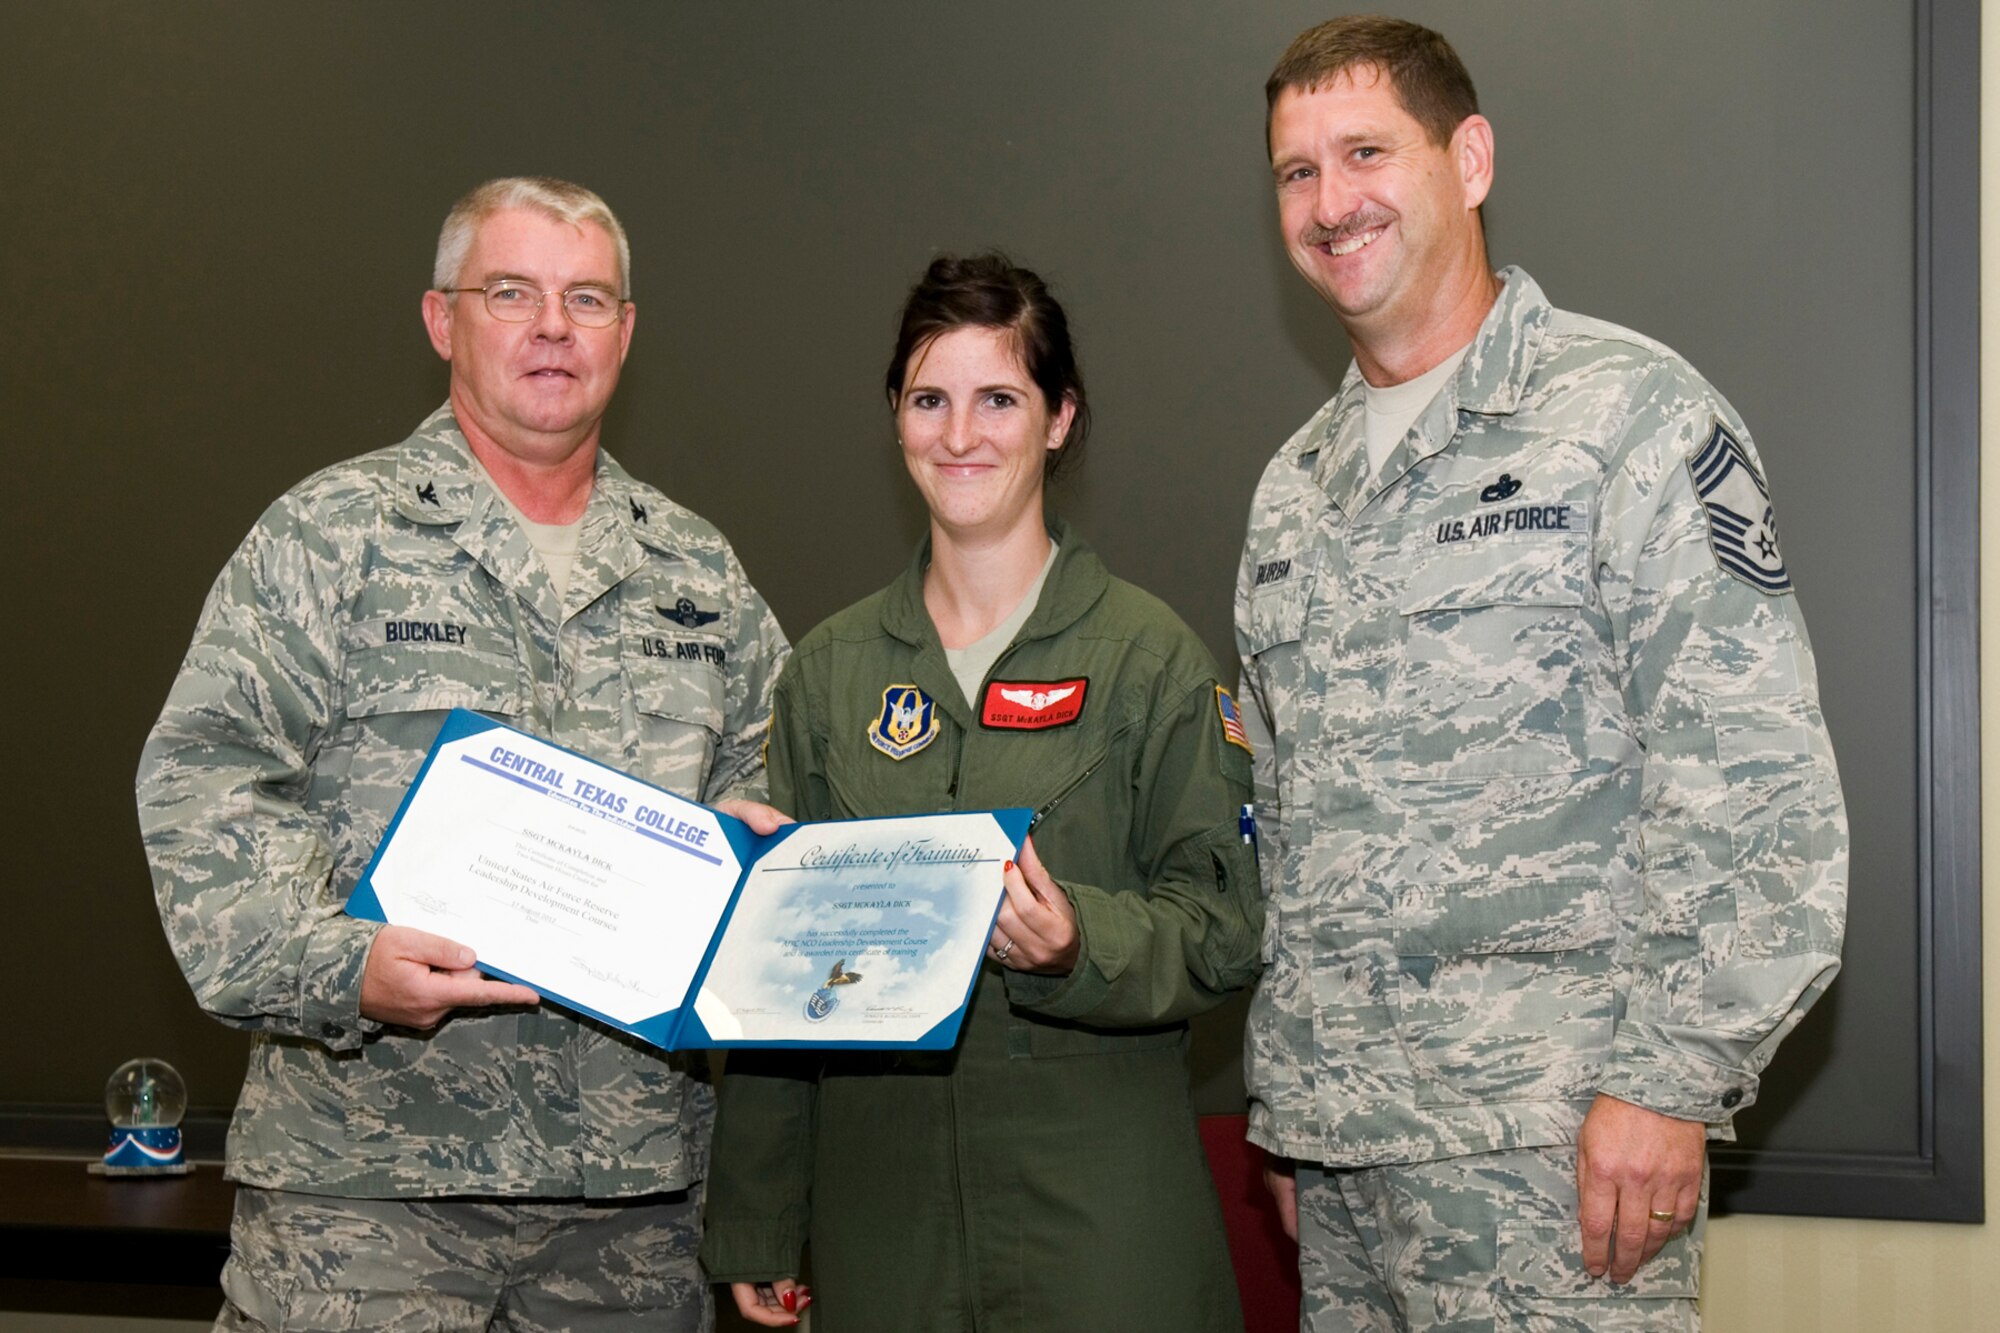 GRISSOM AIR RESERVE BASE, Ind. -- Staff Sgt. McKayla Dick, 74th Air Refueling Squadron inflight refueling technician, receives a certificate of training from Col. Don Buckley, 434th Air Refueling Wing commander, and Chief Master Sergeant James Burba, 434th Maintenance Operations Flight maintenance superintendent, at a graduation ceremony for a Non-Commissioned Officer Leadership Development Course here Aug. 17. Dick graduated the course with 20 other NCOs. (U.S. Air Force photo/Senior Airman Andrew McLaughlin)